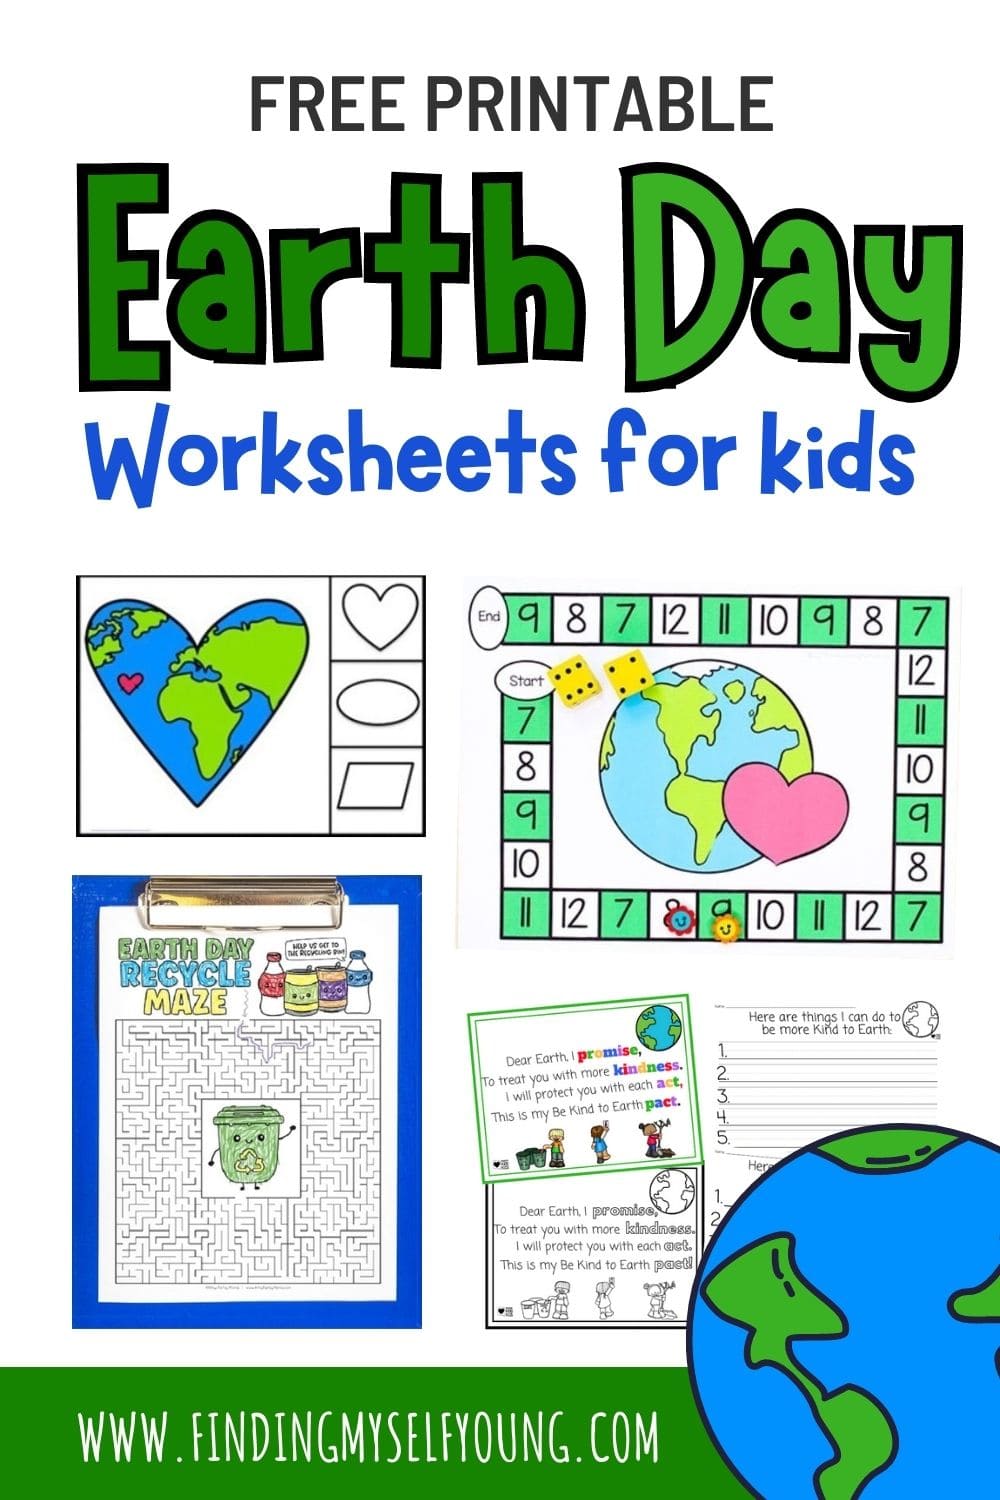 free printable Earth Day worksheets for kids